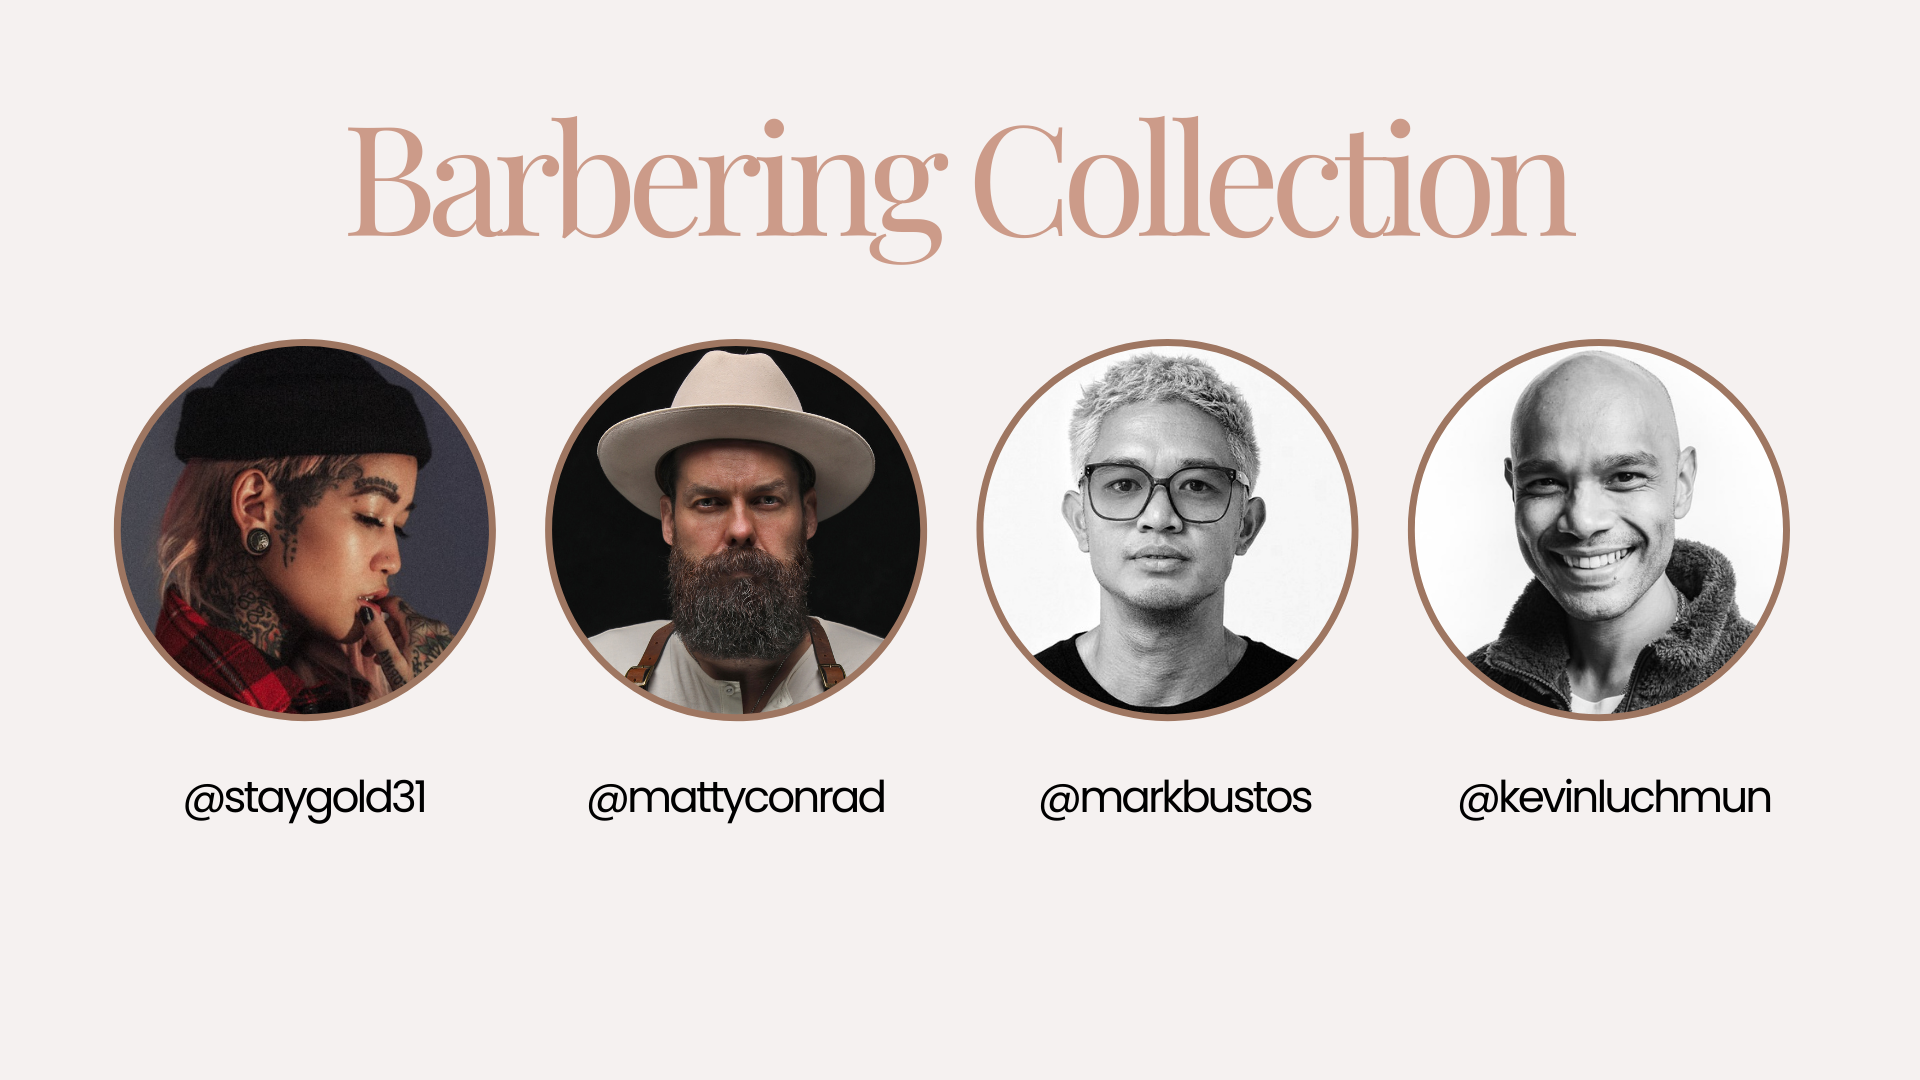 Barbering Collection